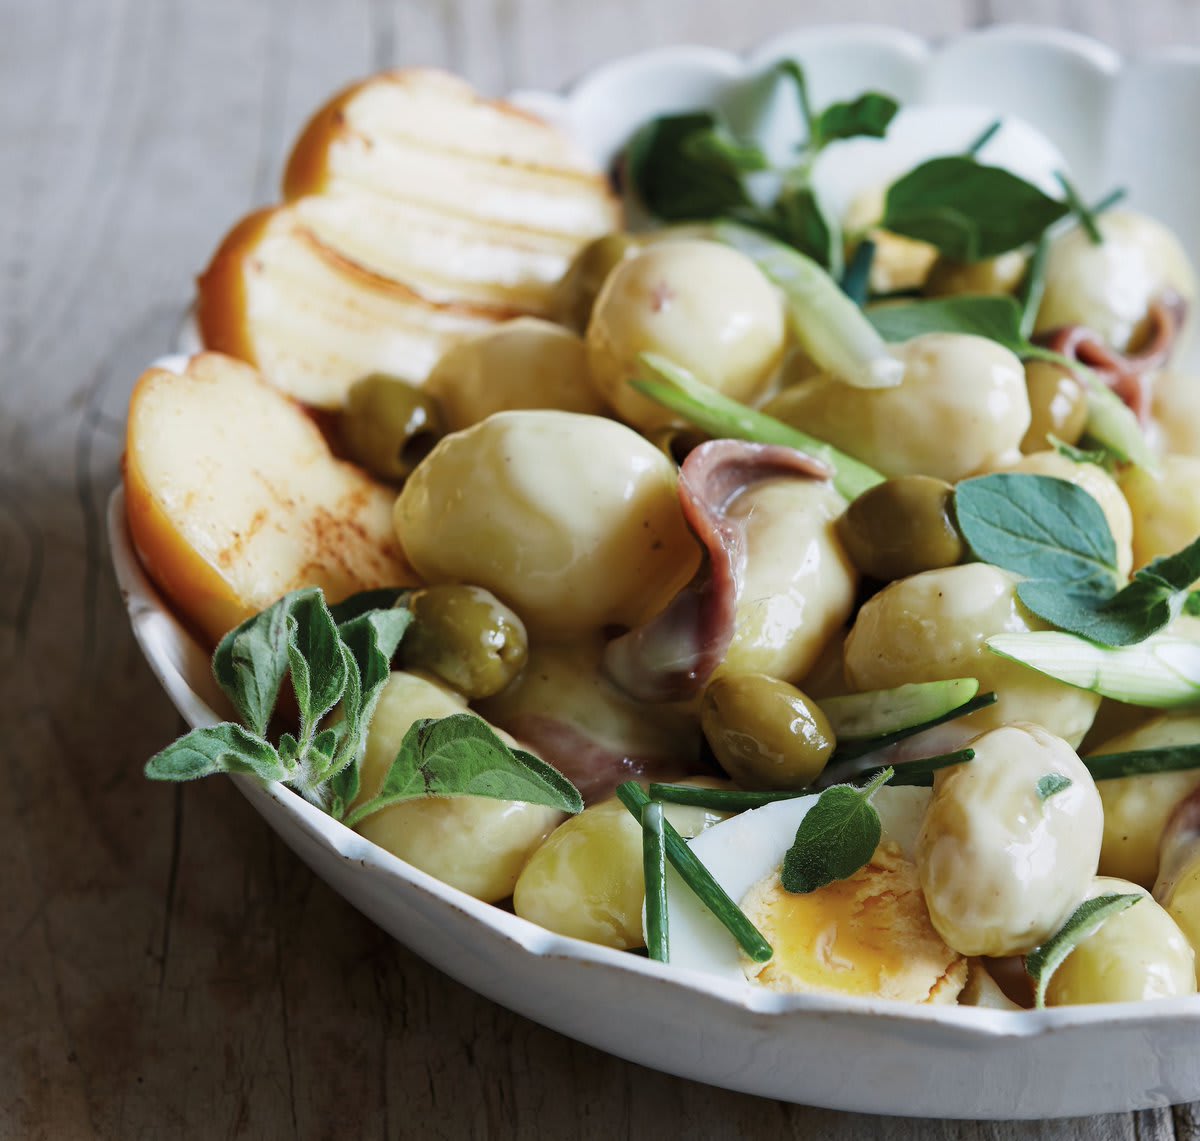 Picnic weather is nearly here! Upgrade your potato salad with this super savory one featuring anchovies.